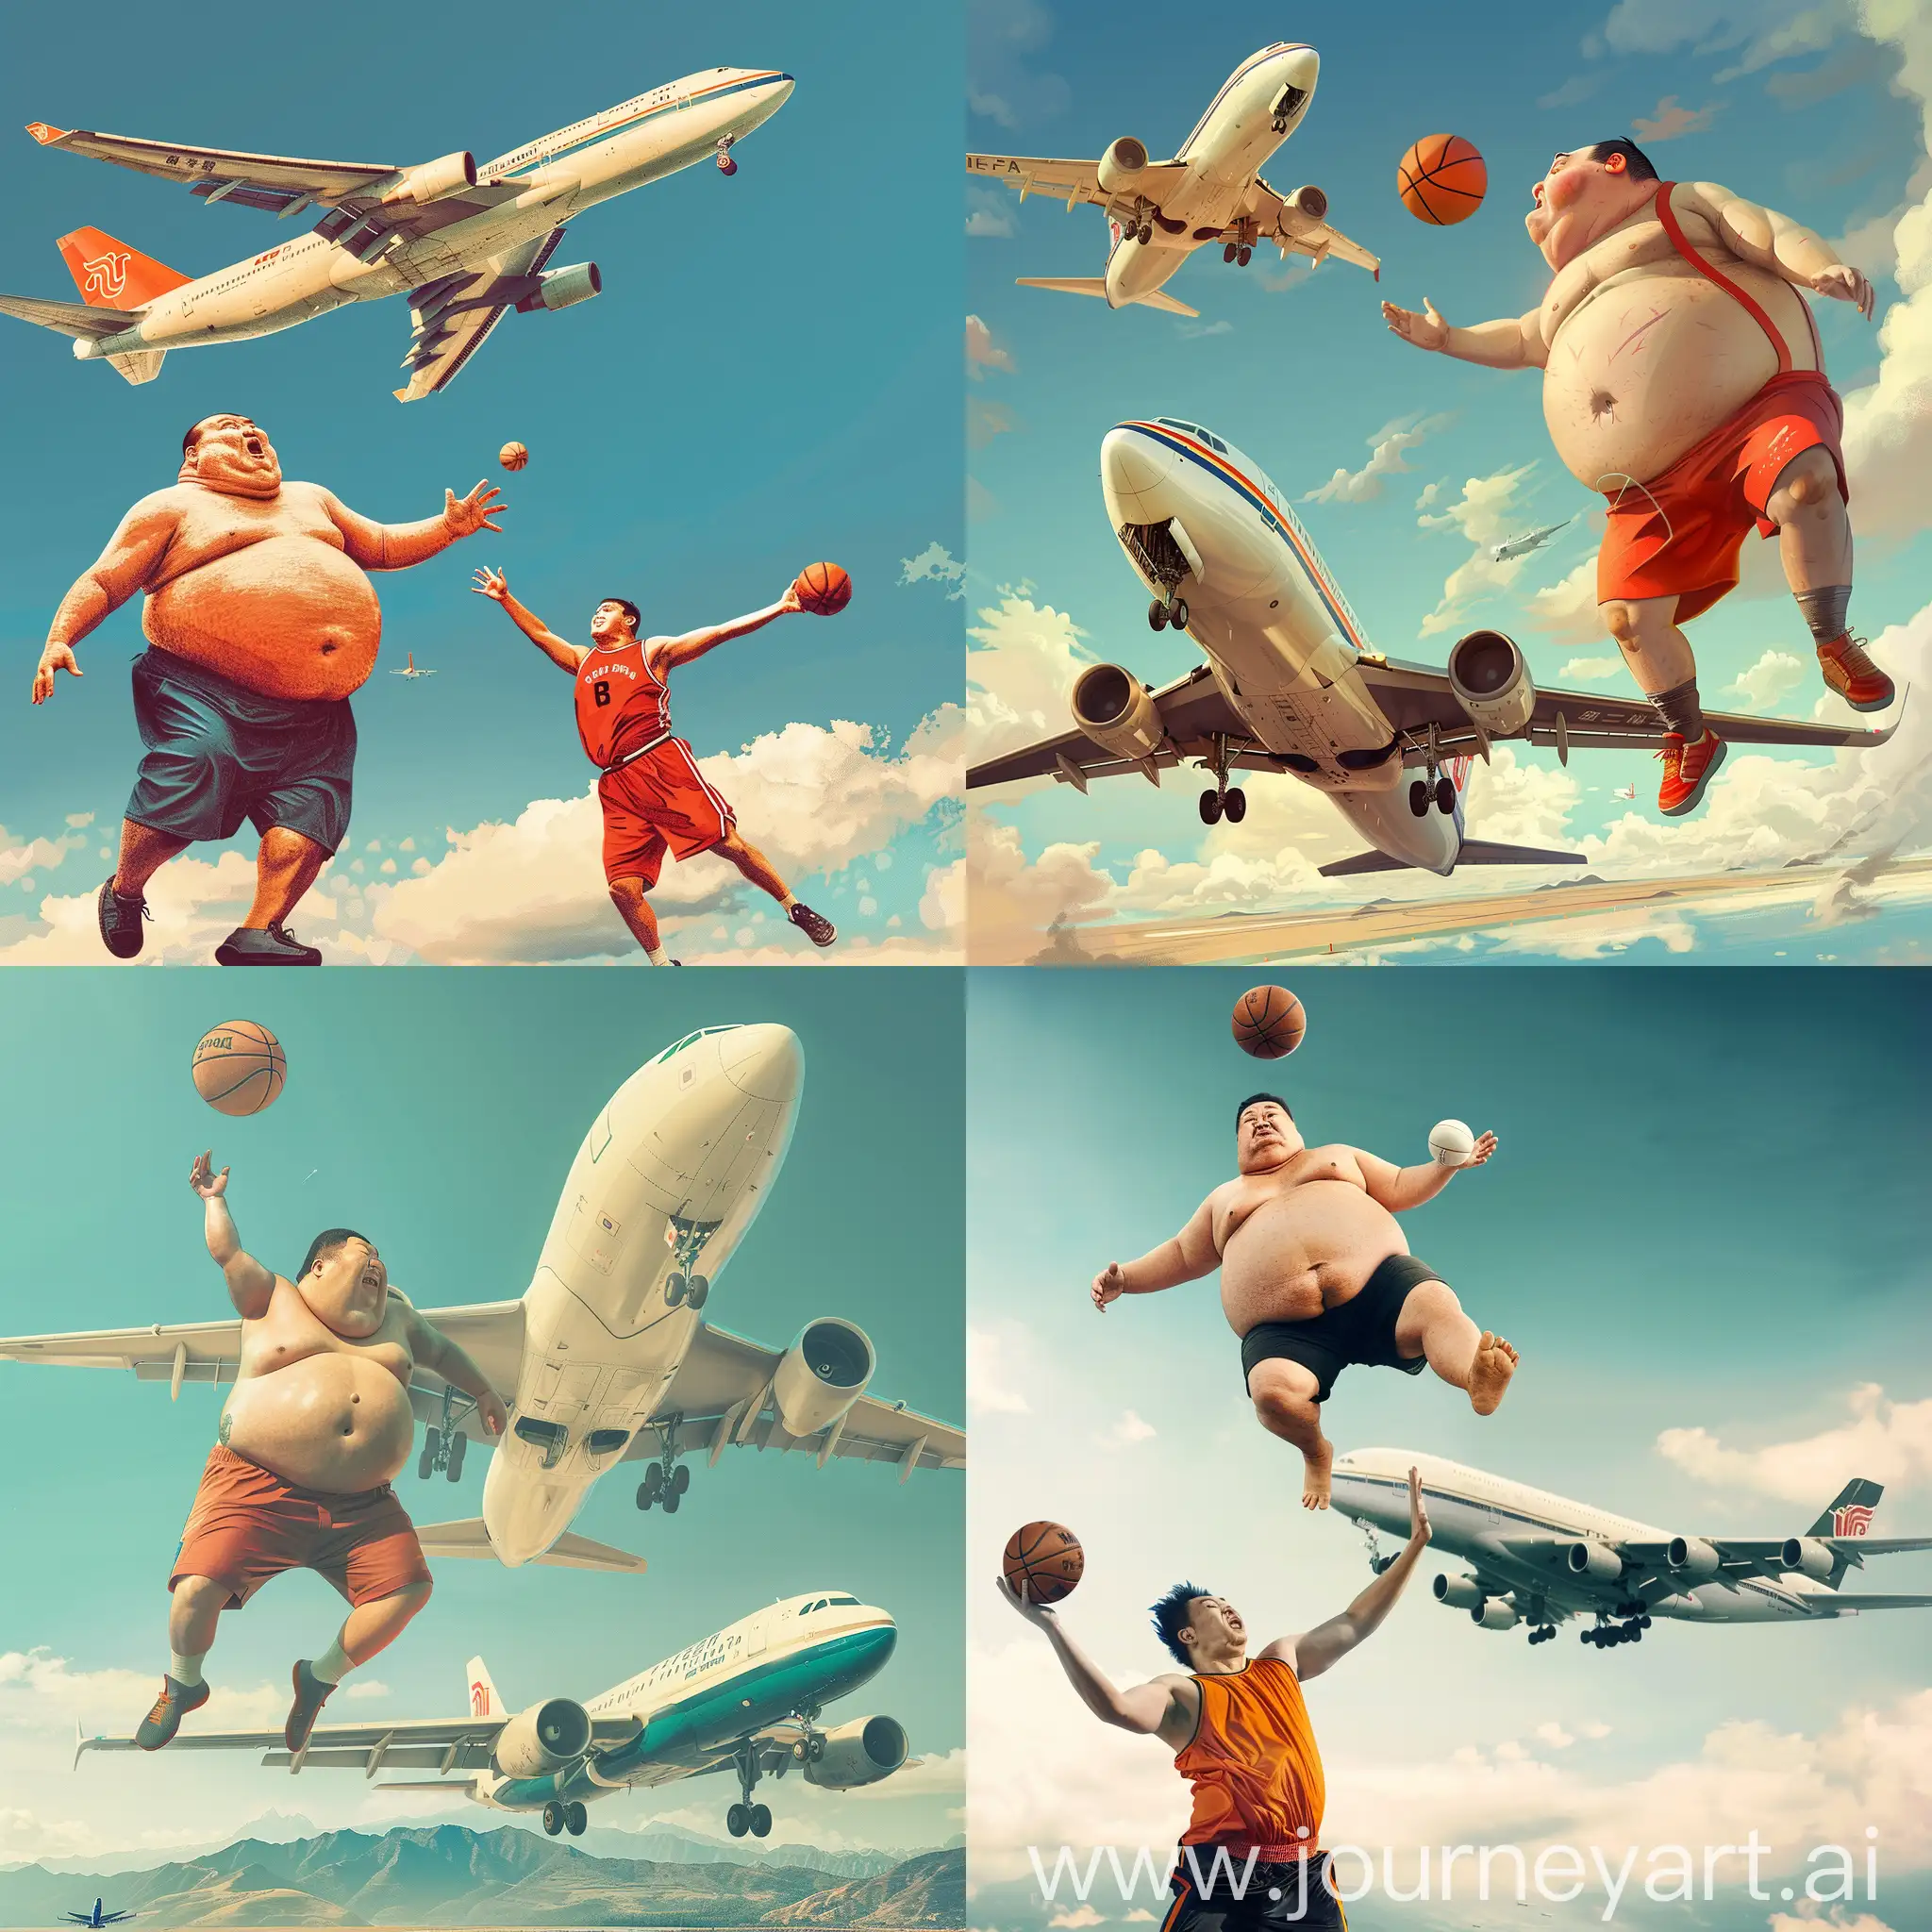 Chinese-Fat-Man-Playing-Basketball-While-Flying-Over-Airplane